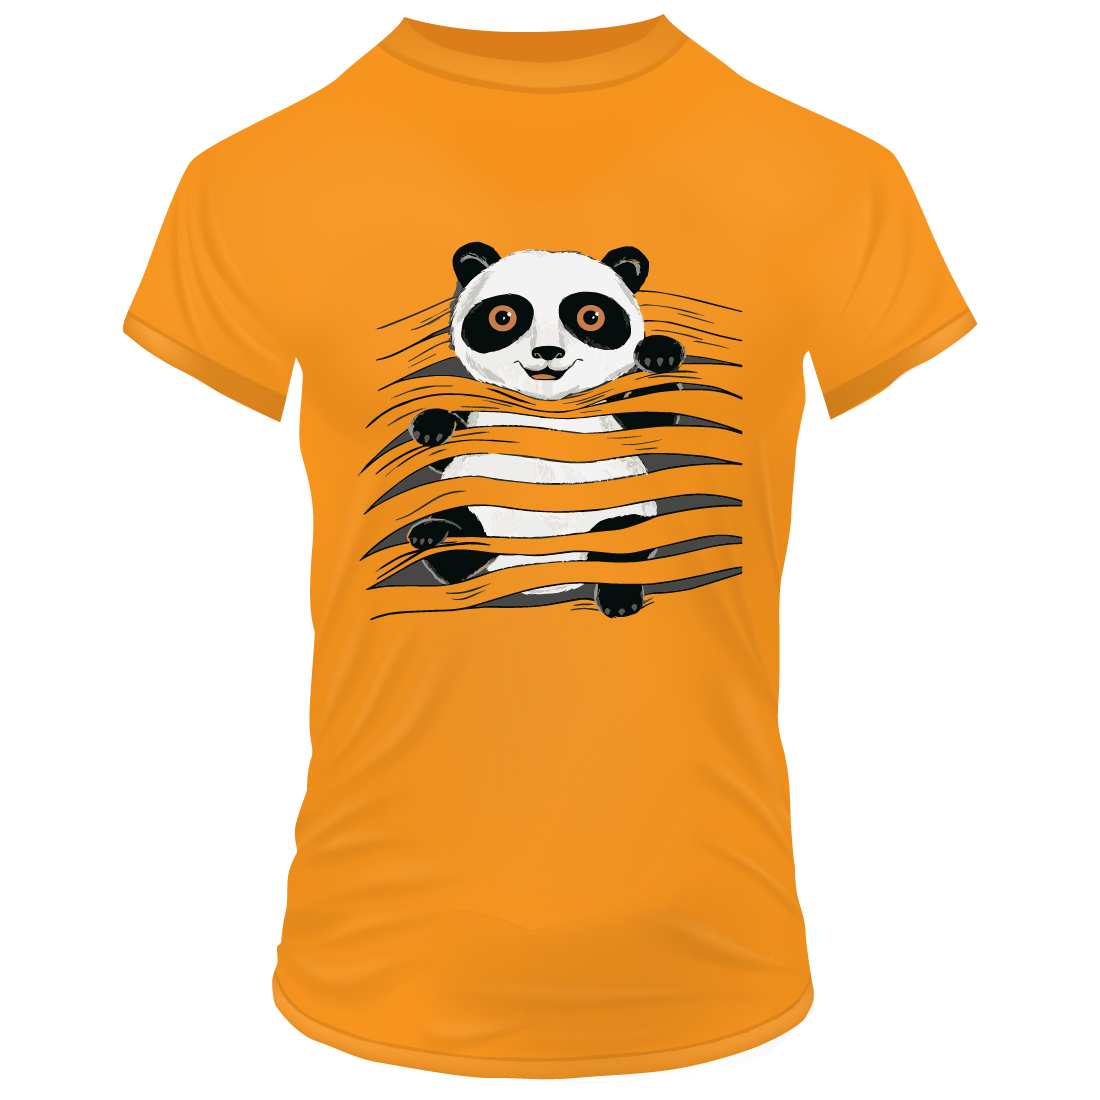 Cute Funny Panda Coming Out from a torn cloth Vector illustration T-shirt design cover image.